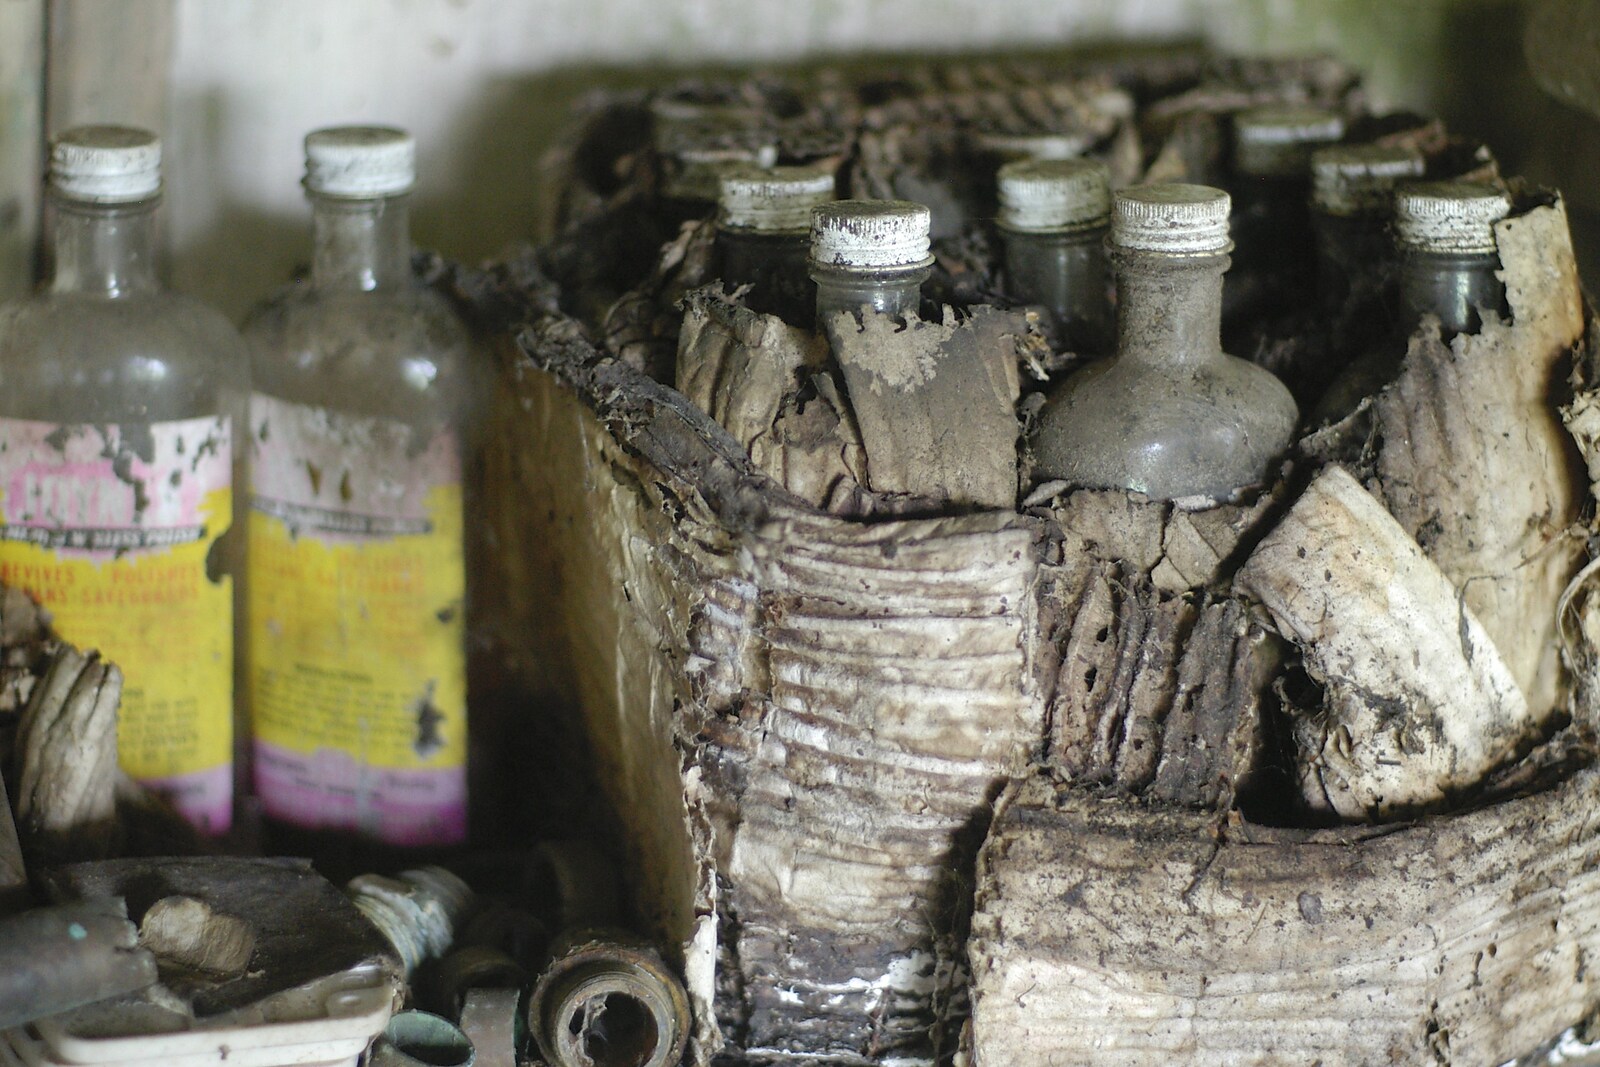 A box of old bottles from An Elegy for a Shed, Hopton, Suffolk - 28th March 2005